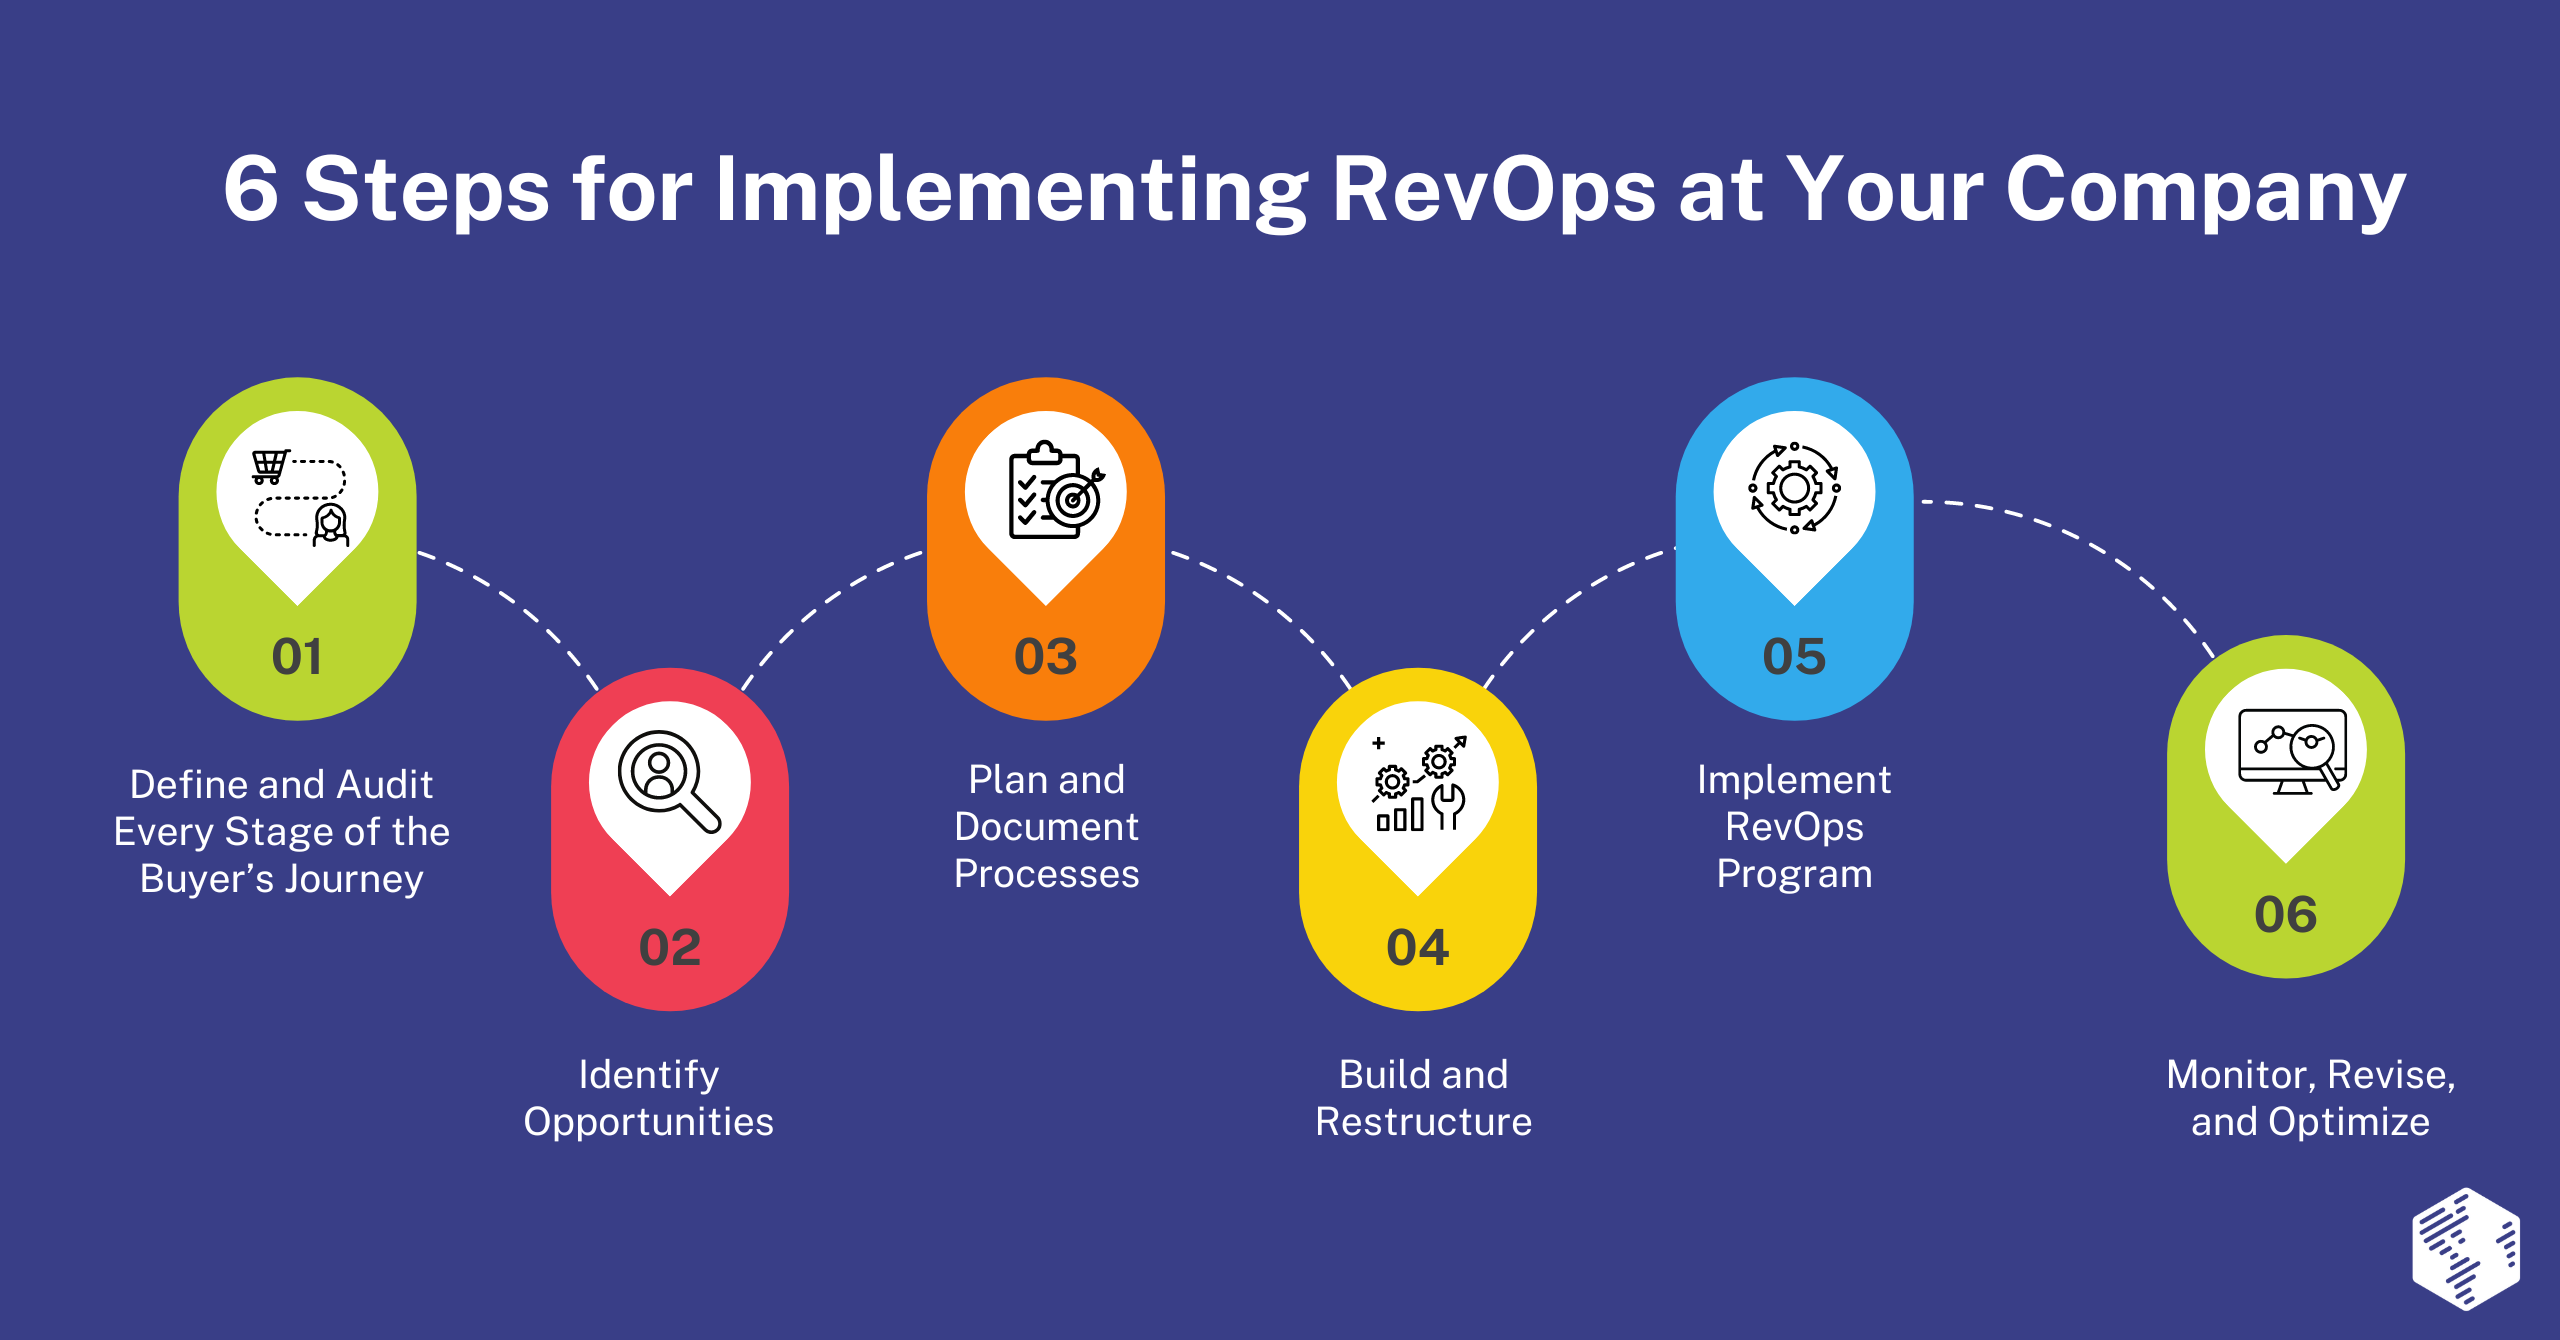 Steps to Implement RevOps